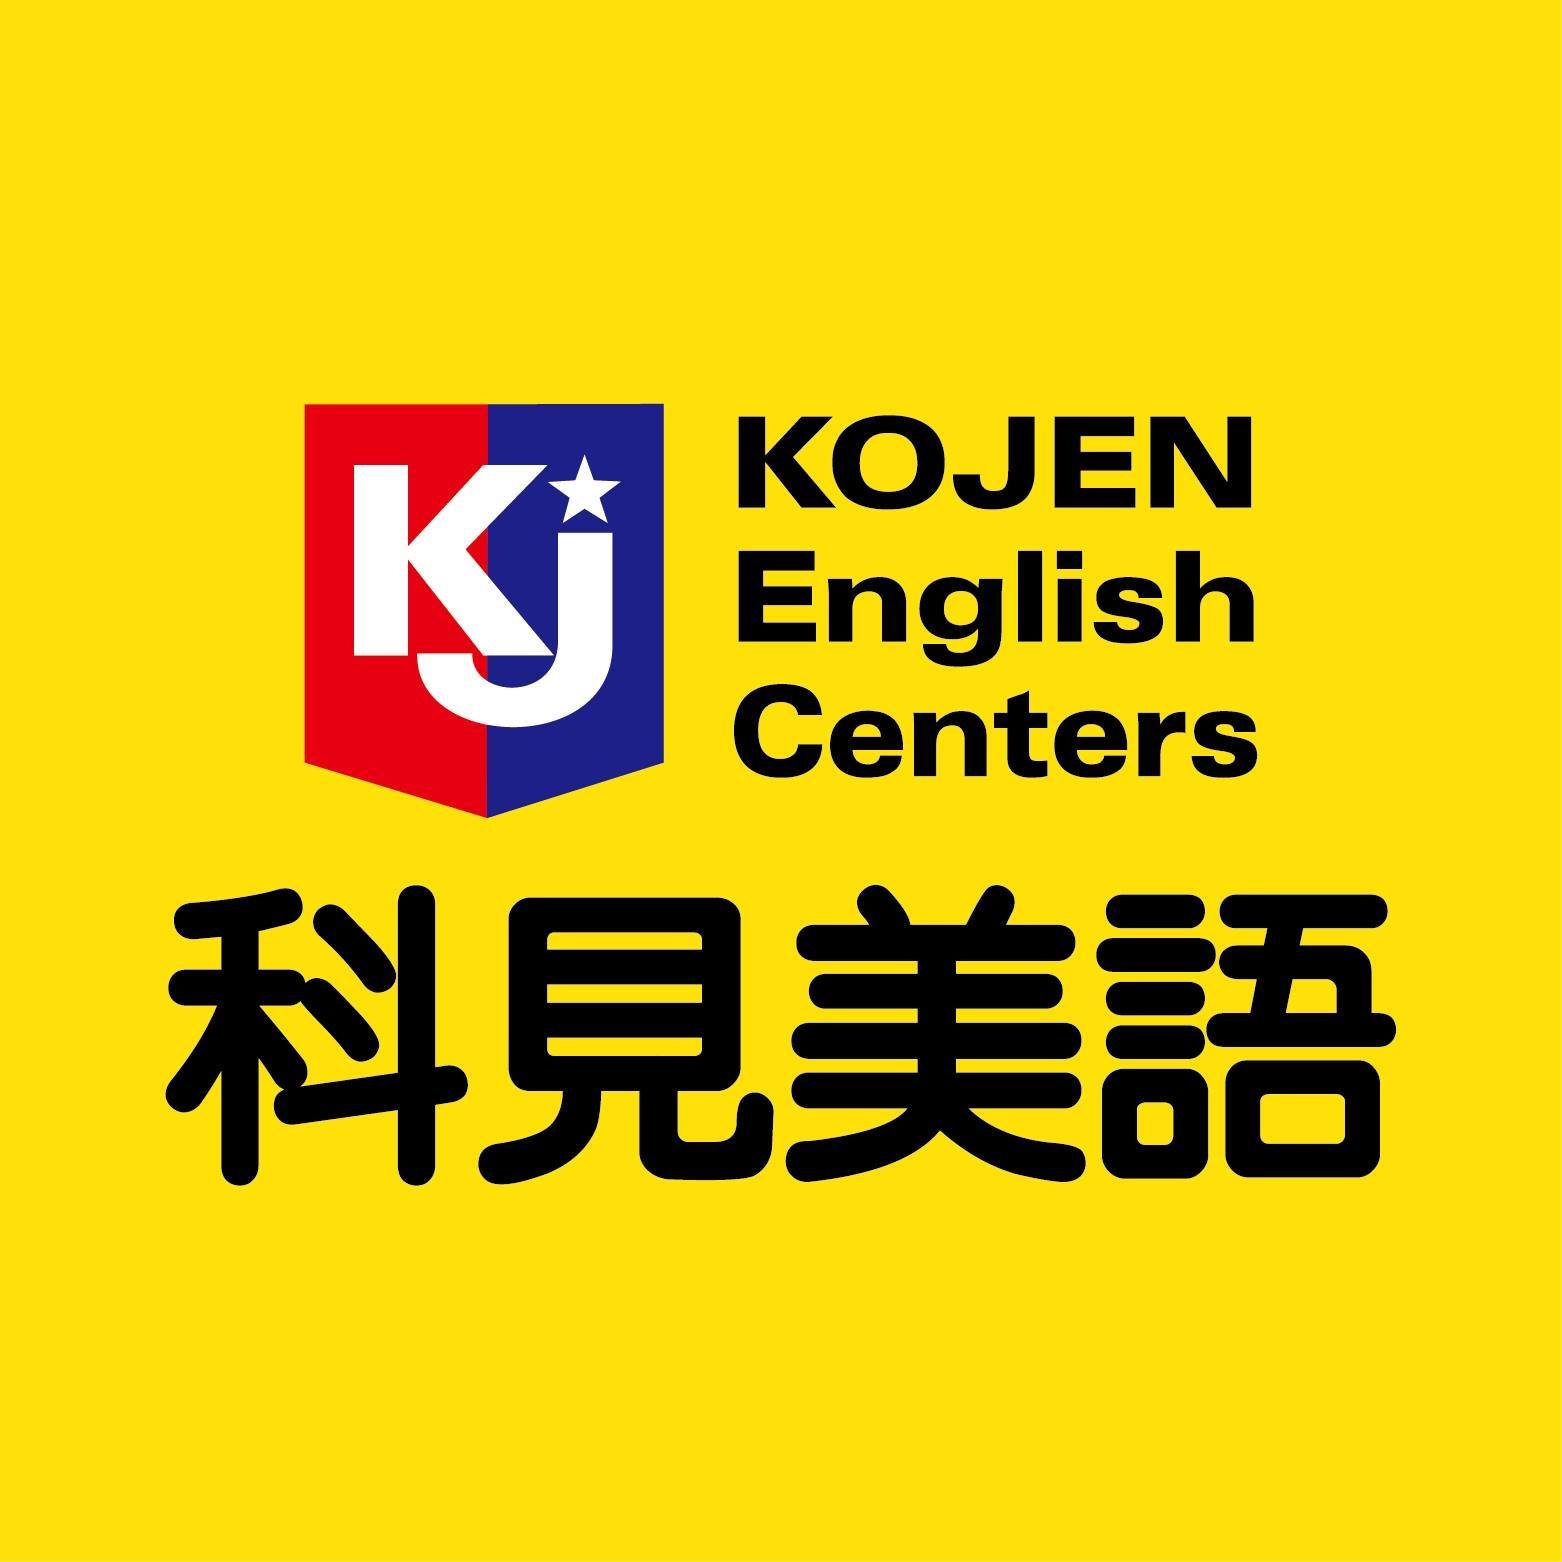 Teaching English and Living in Taiwan Jobs Available 教學工作, KOJEN English Centers in Taiwan Children's English teachers image